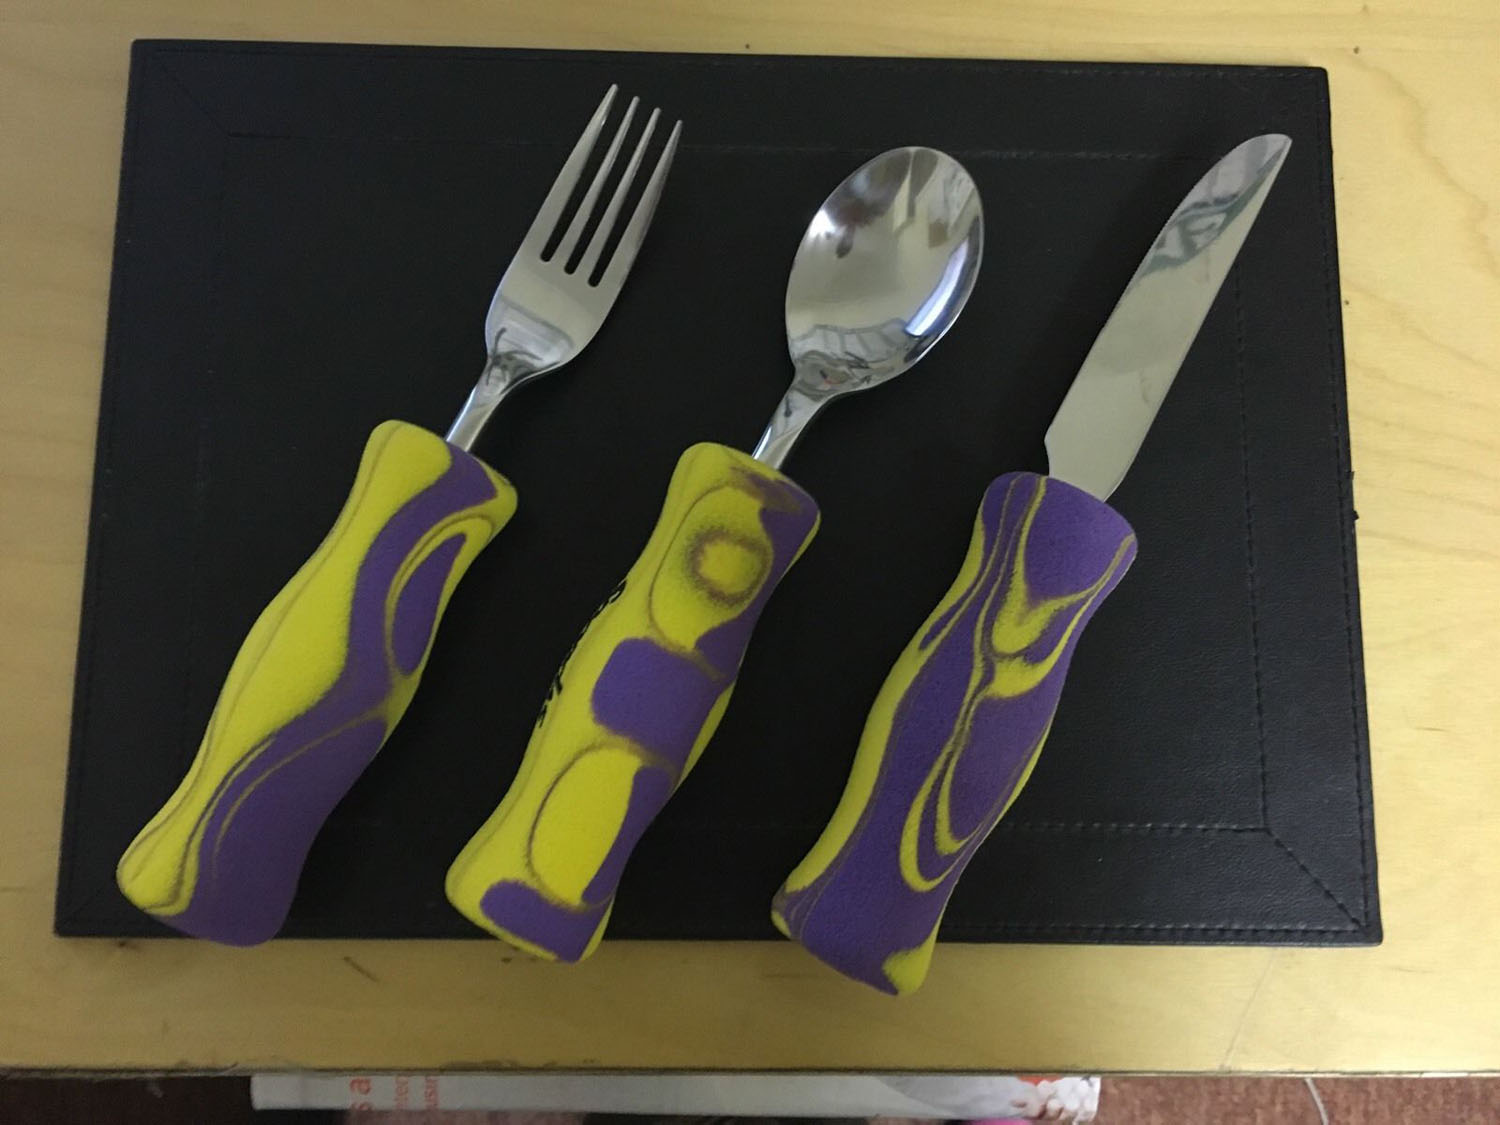 Disabled Easy Grip Cutlery Set Large Handle Knife, Fork and Spoon Foam Arthritis